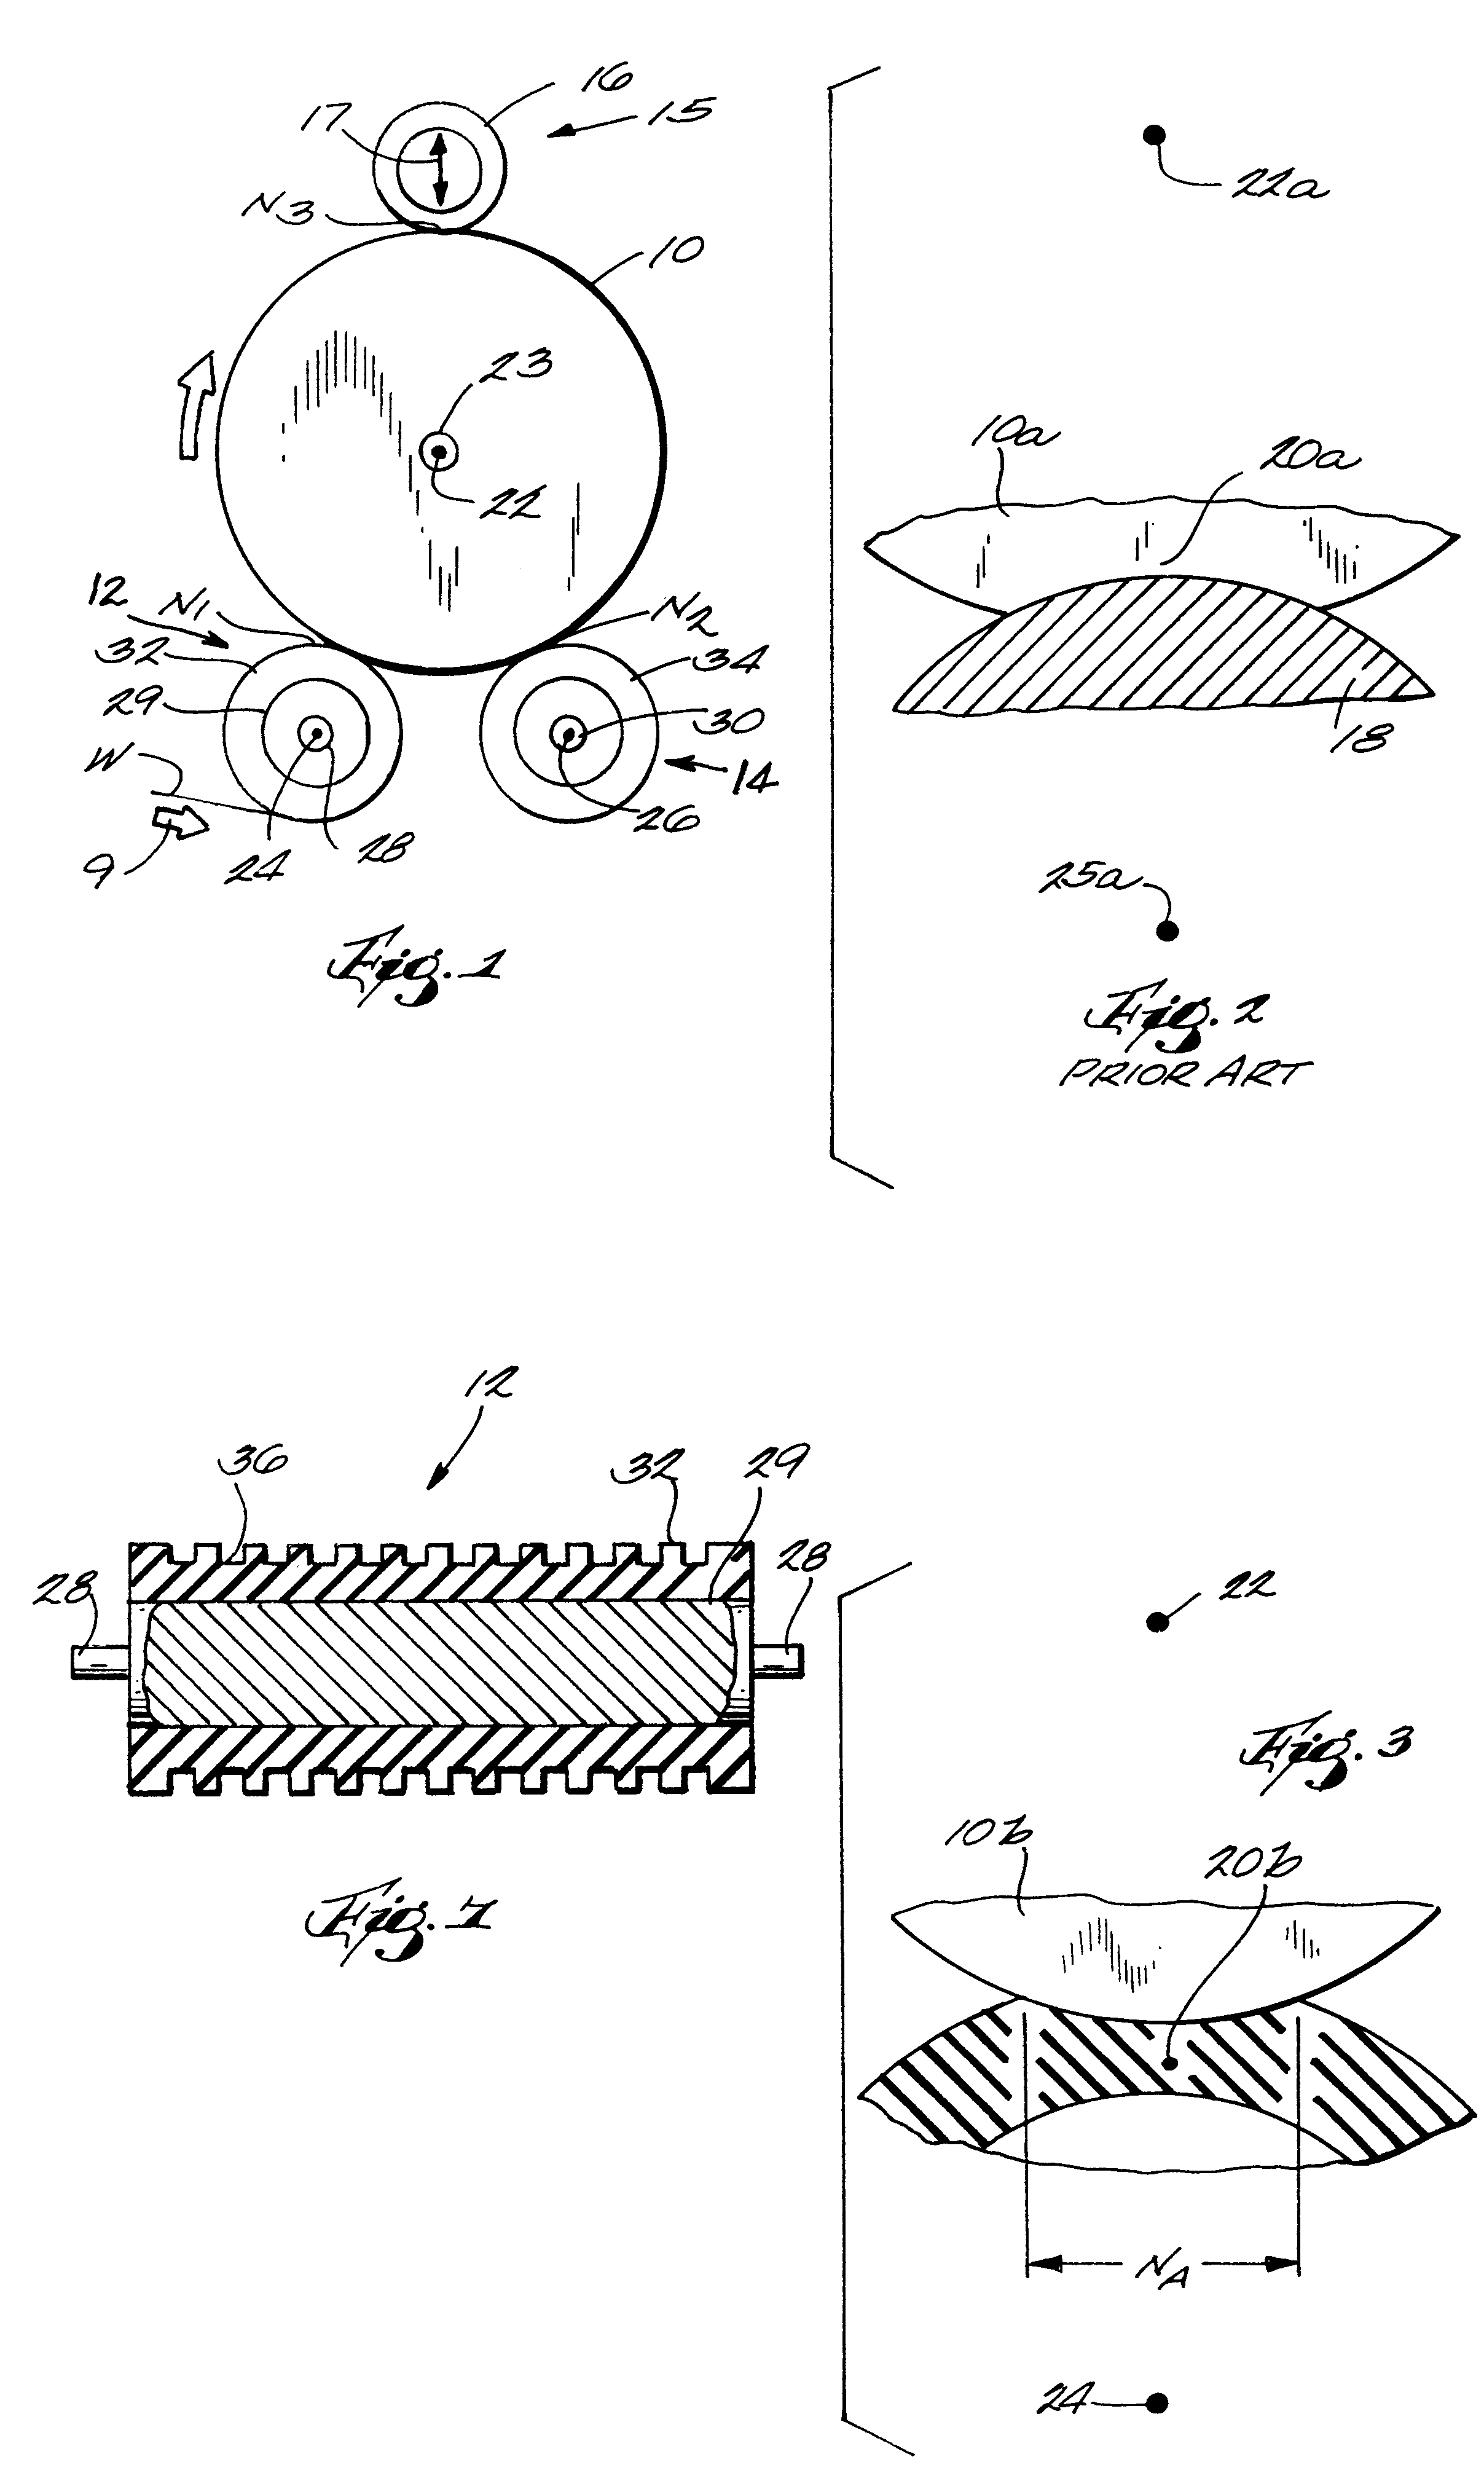 Support or pressure roll for a paper roll winder